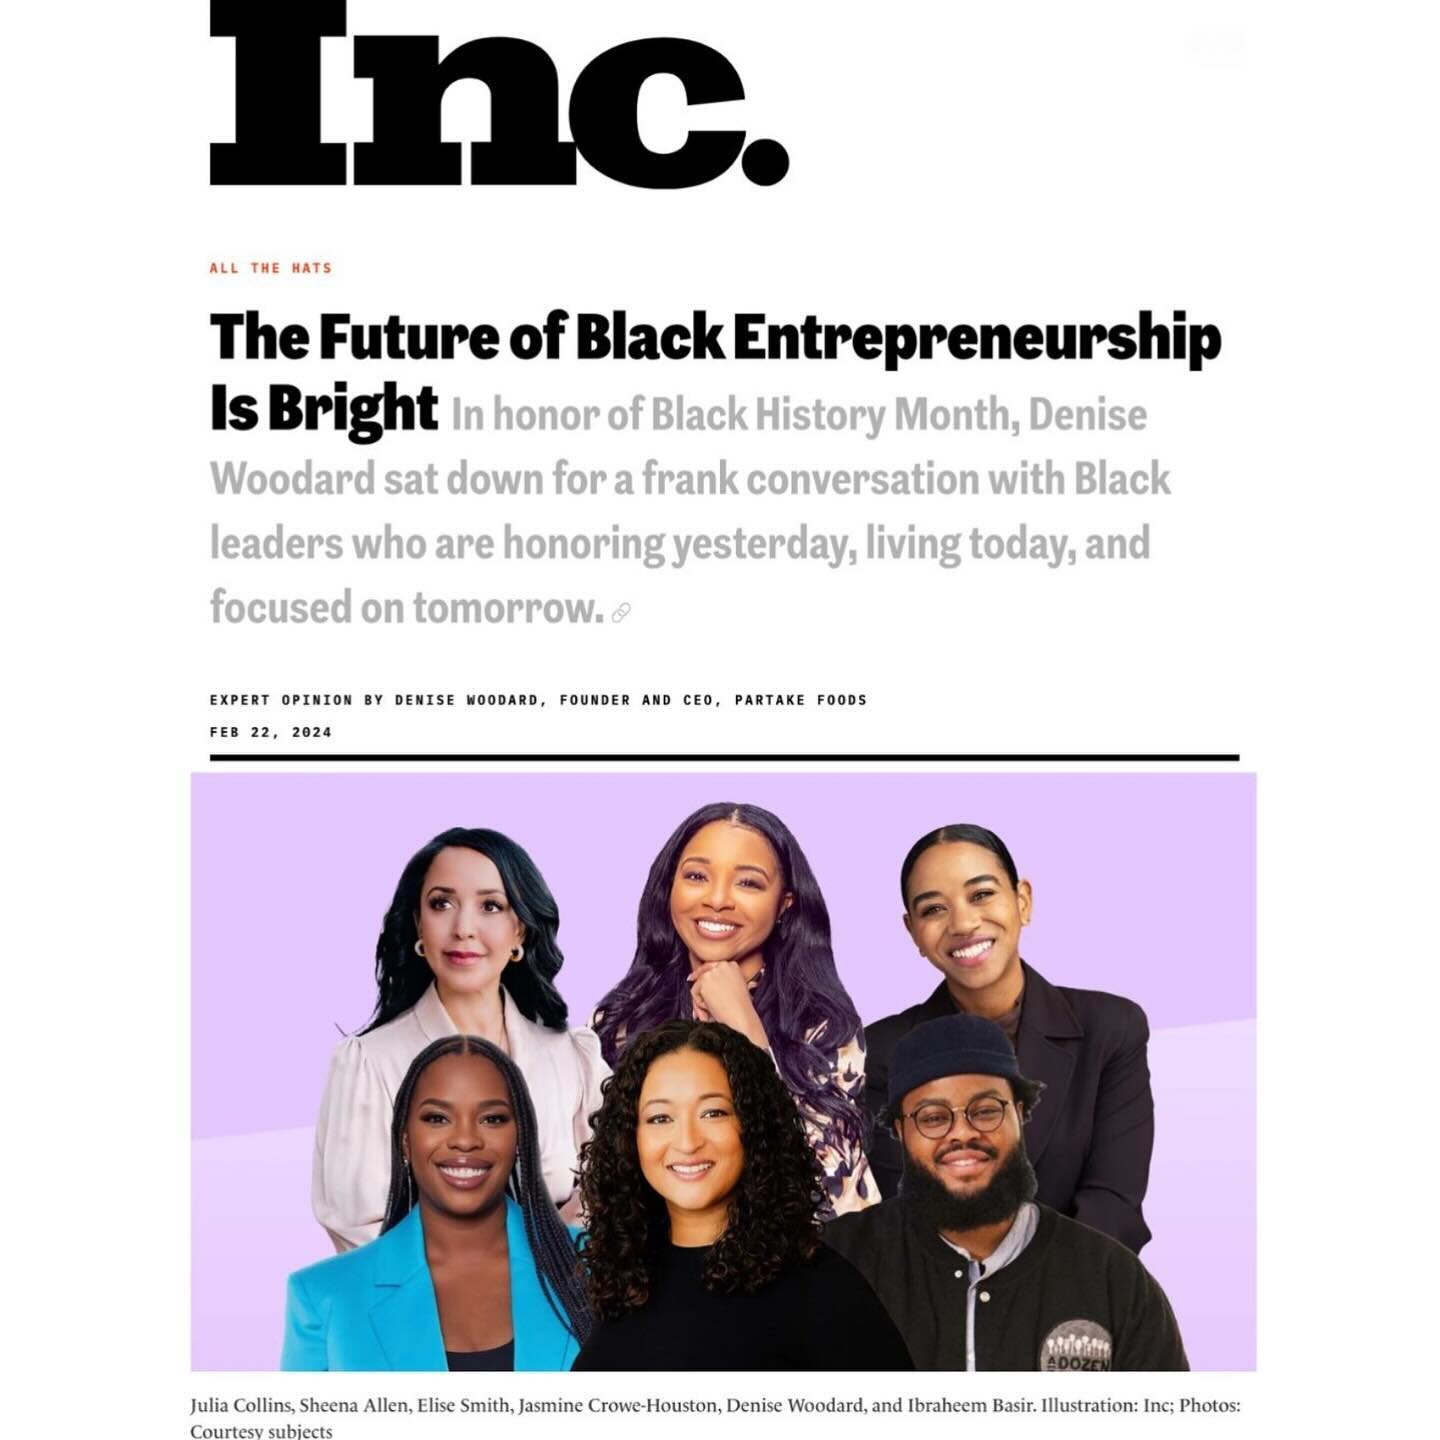 @incmagazine: The Future of Black Entrepreneurship is Bright 

Entrepreneurship is hard, and the road is usually tougher for Black entrepreneurs for so many reasons-funding, biases, etc. But as usual, we push through and find success. Thank you @deni